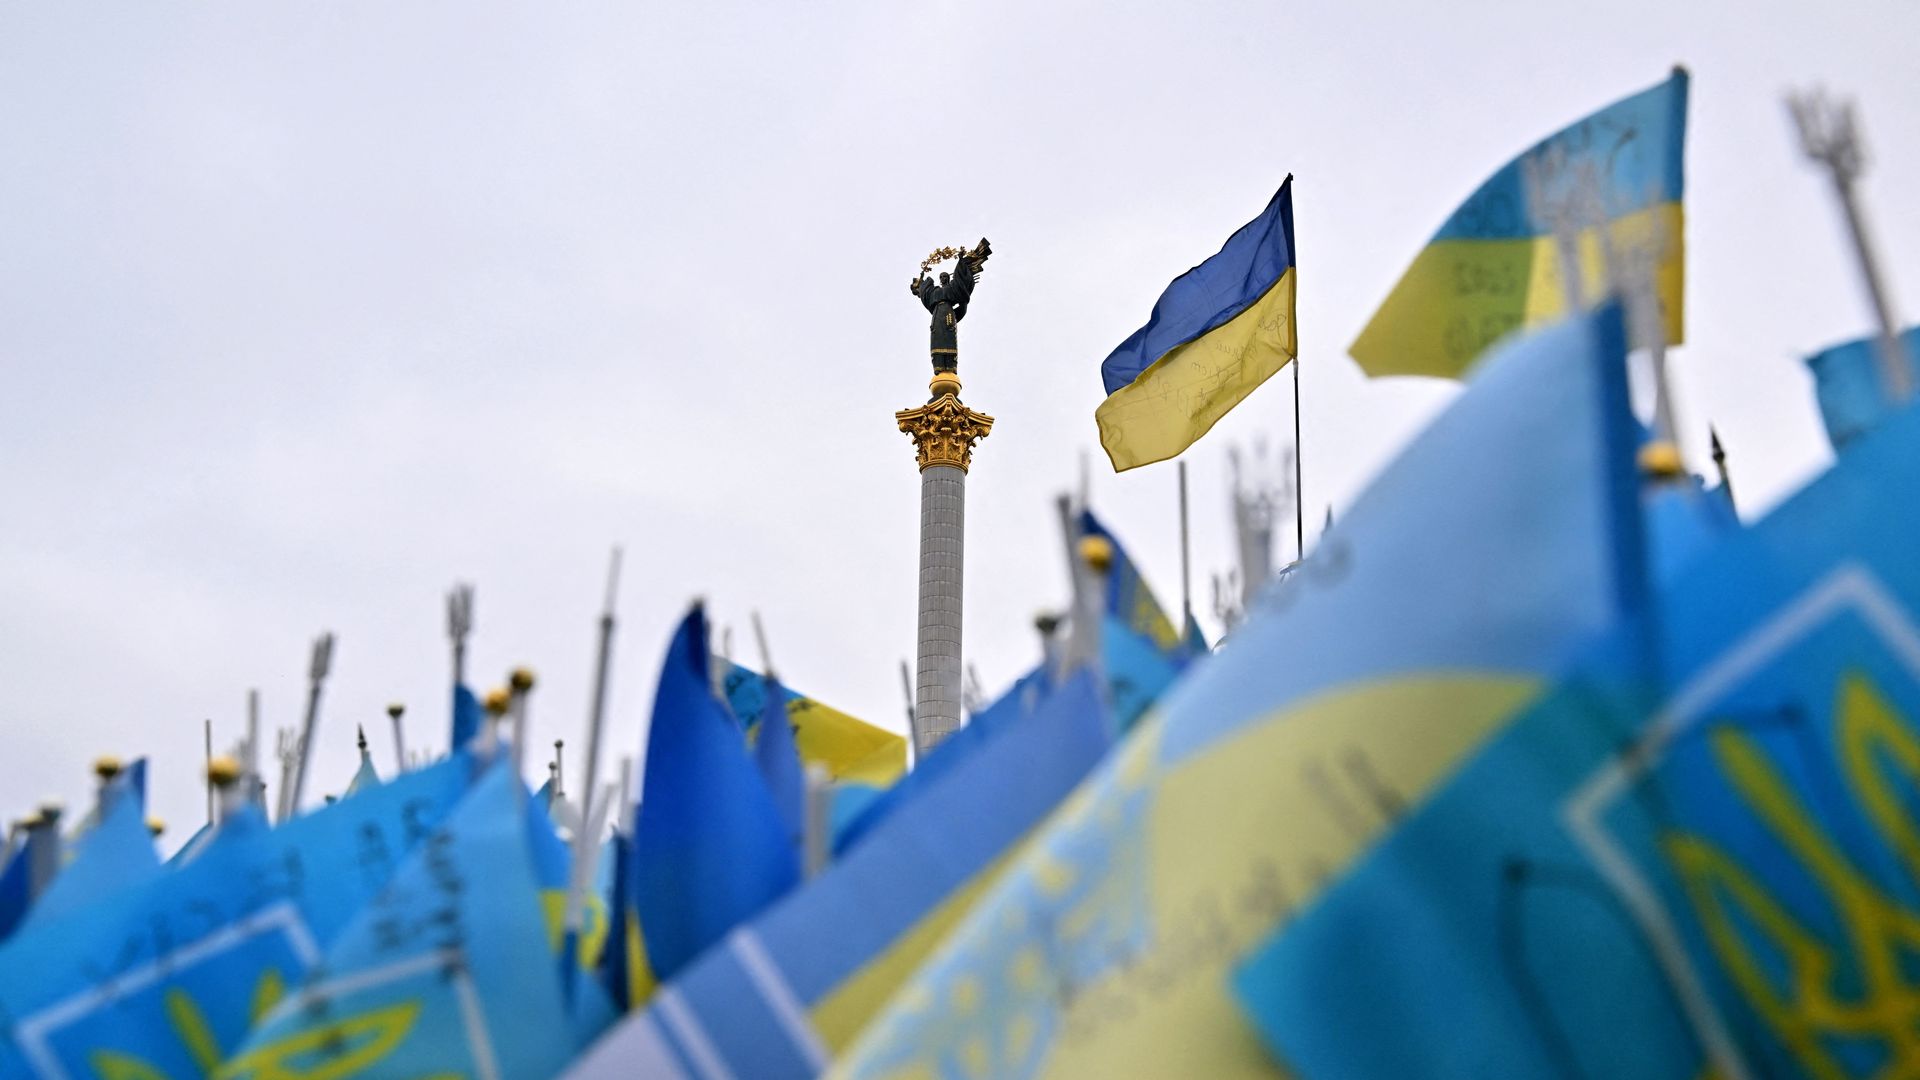 Photo of a monument with several Ukrainian flags flying in the foreground